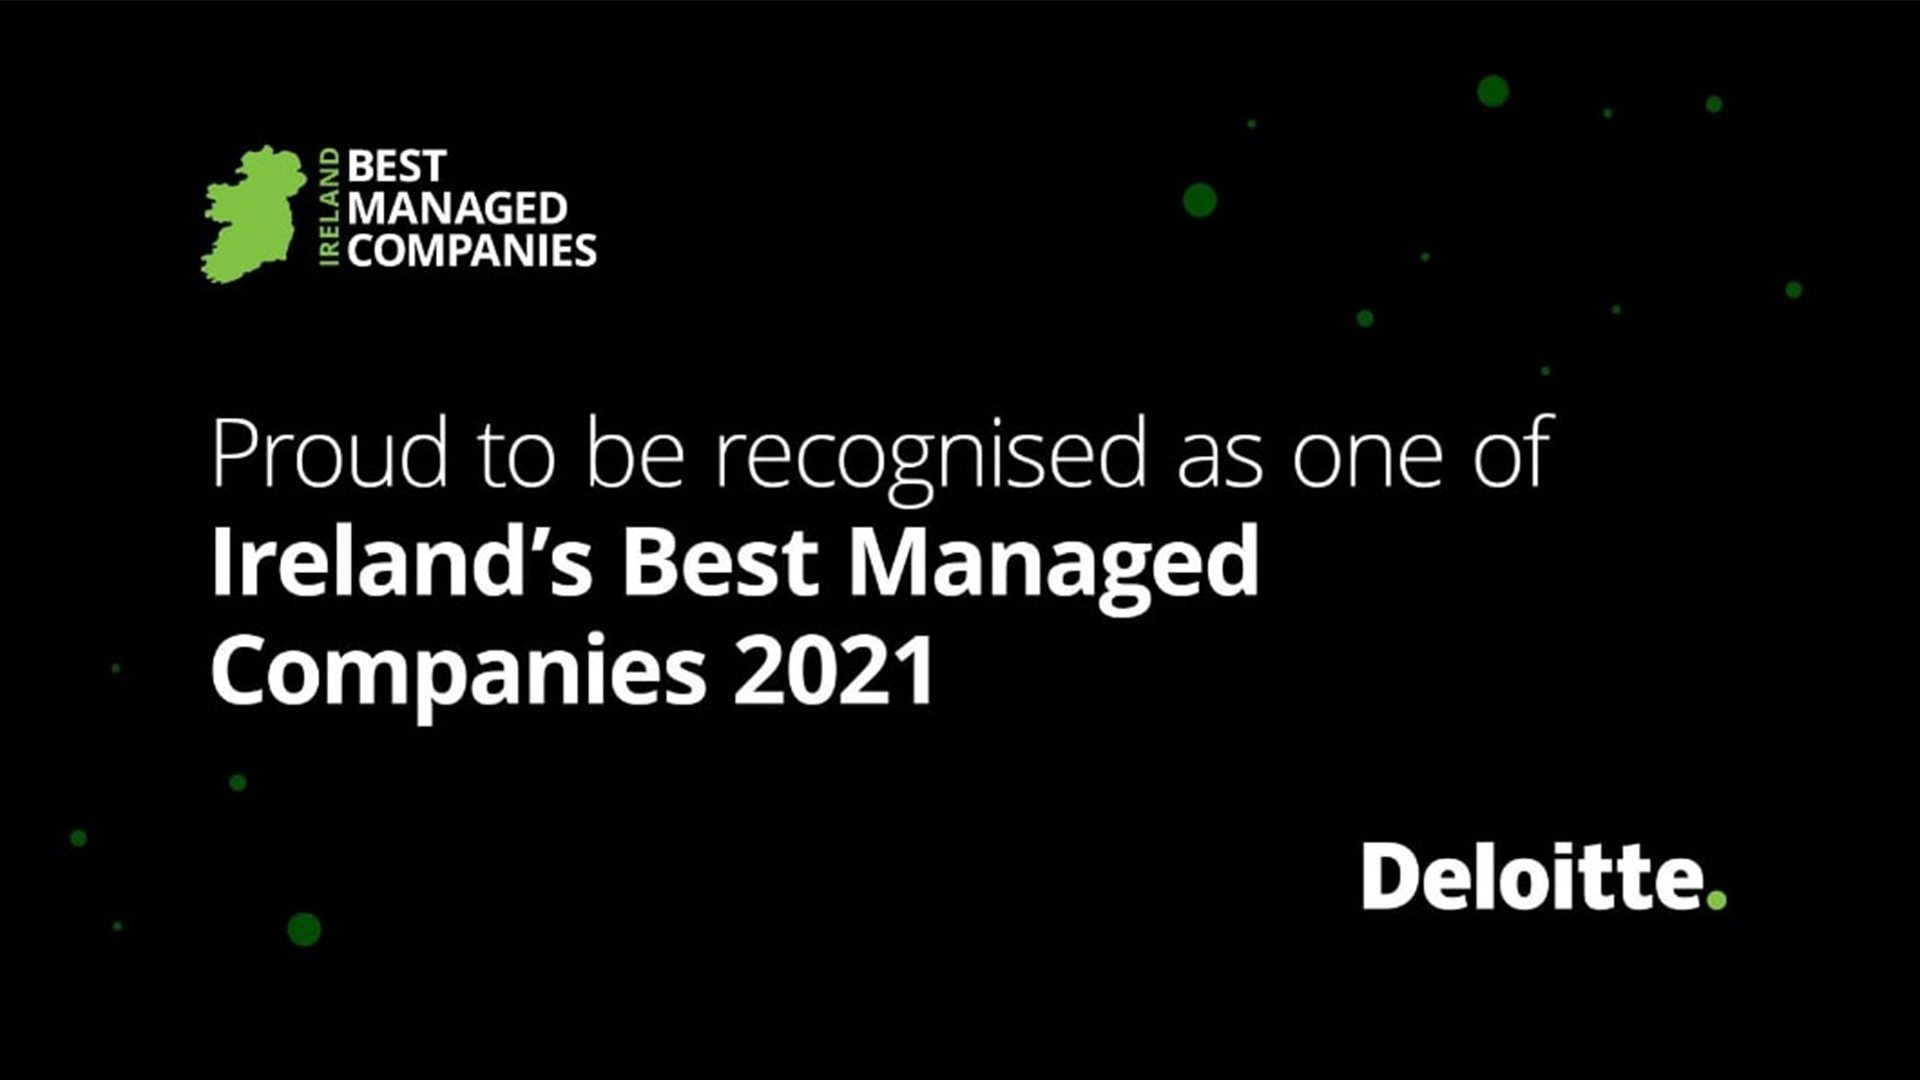 Welltel announced Best Managed Company Banner 2021